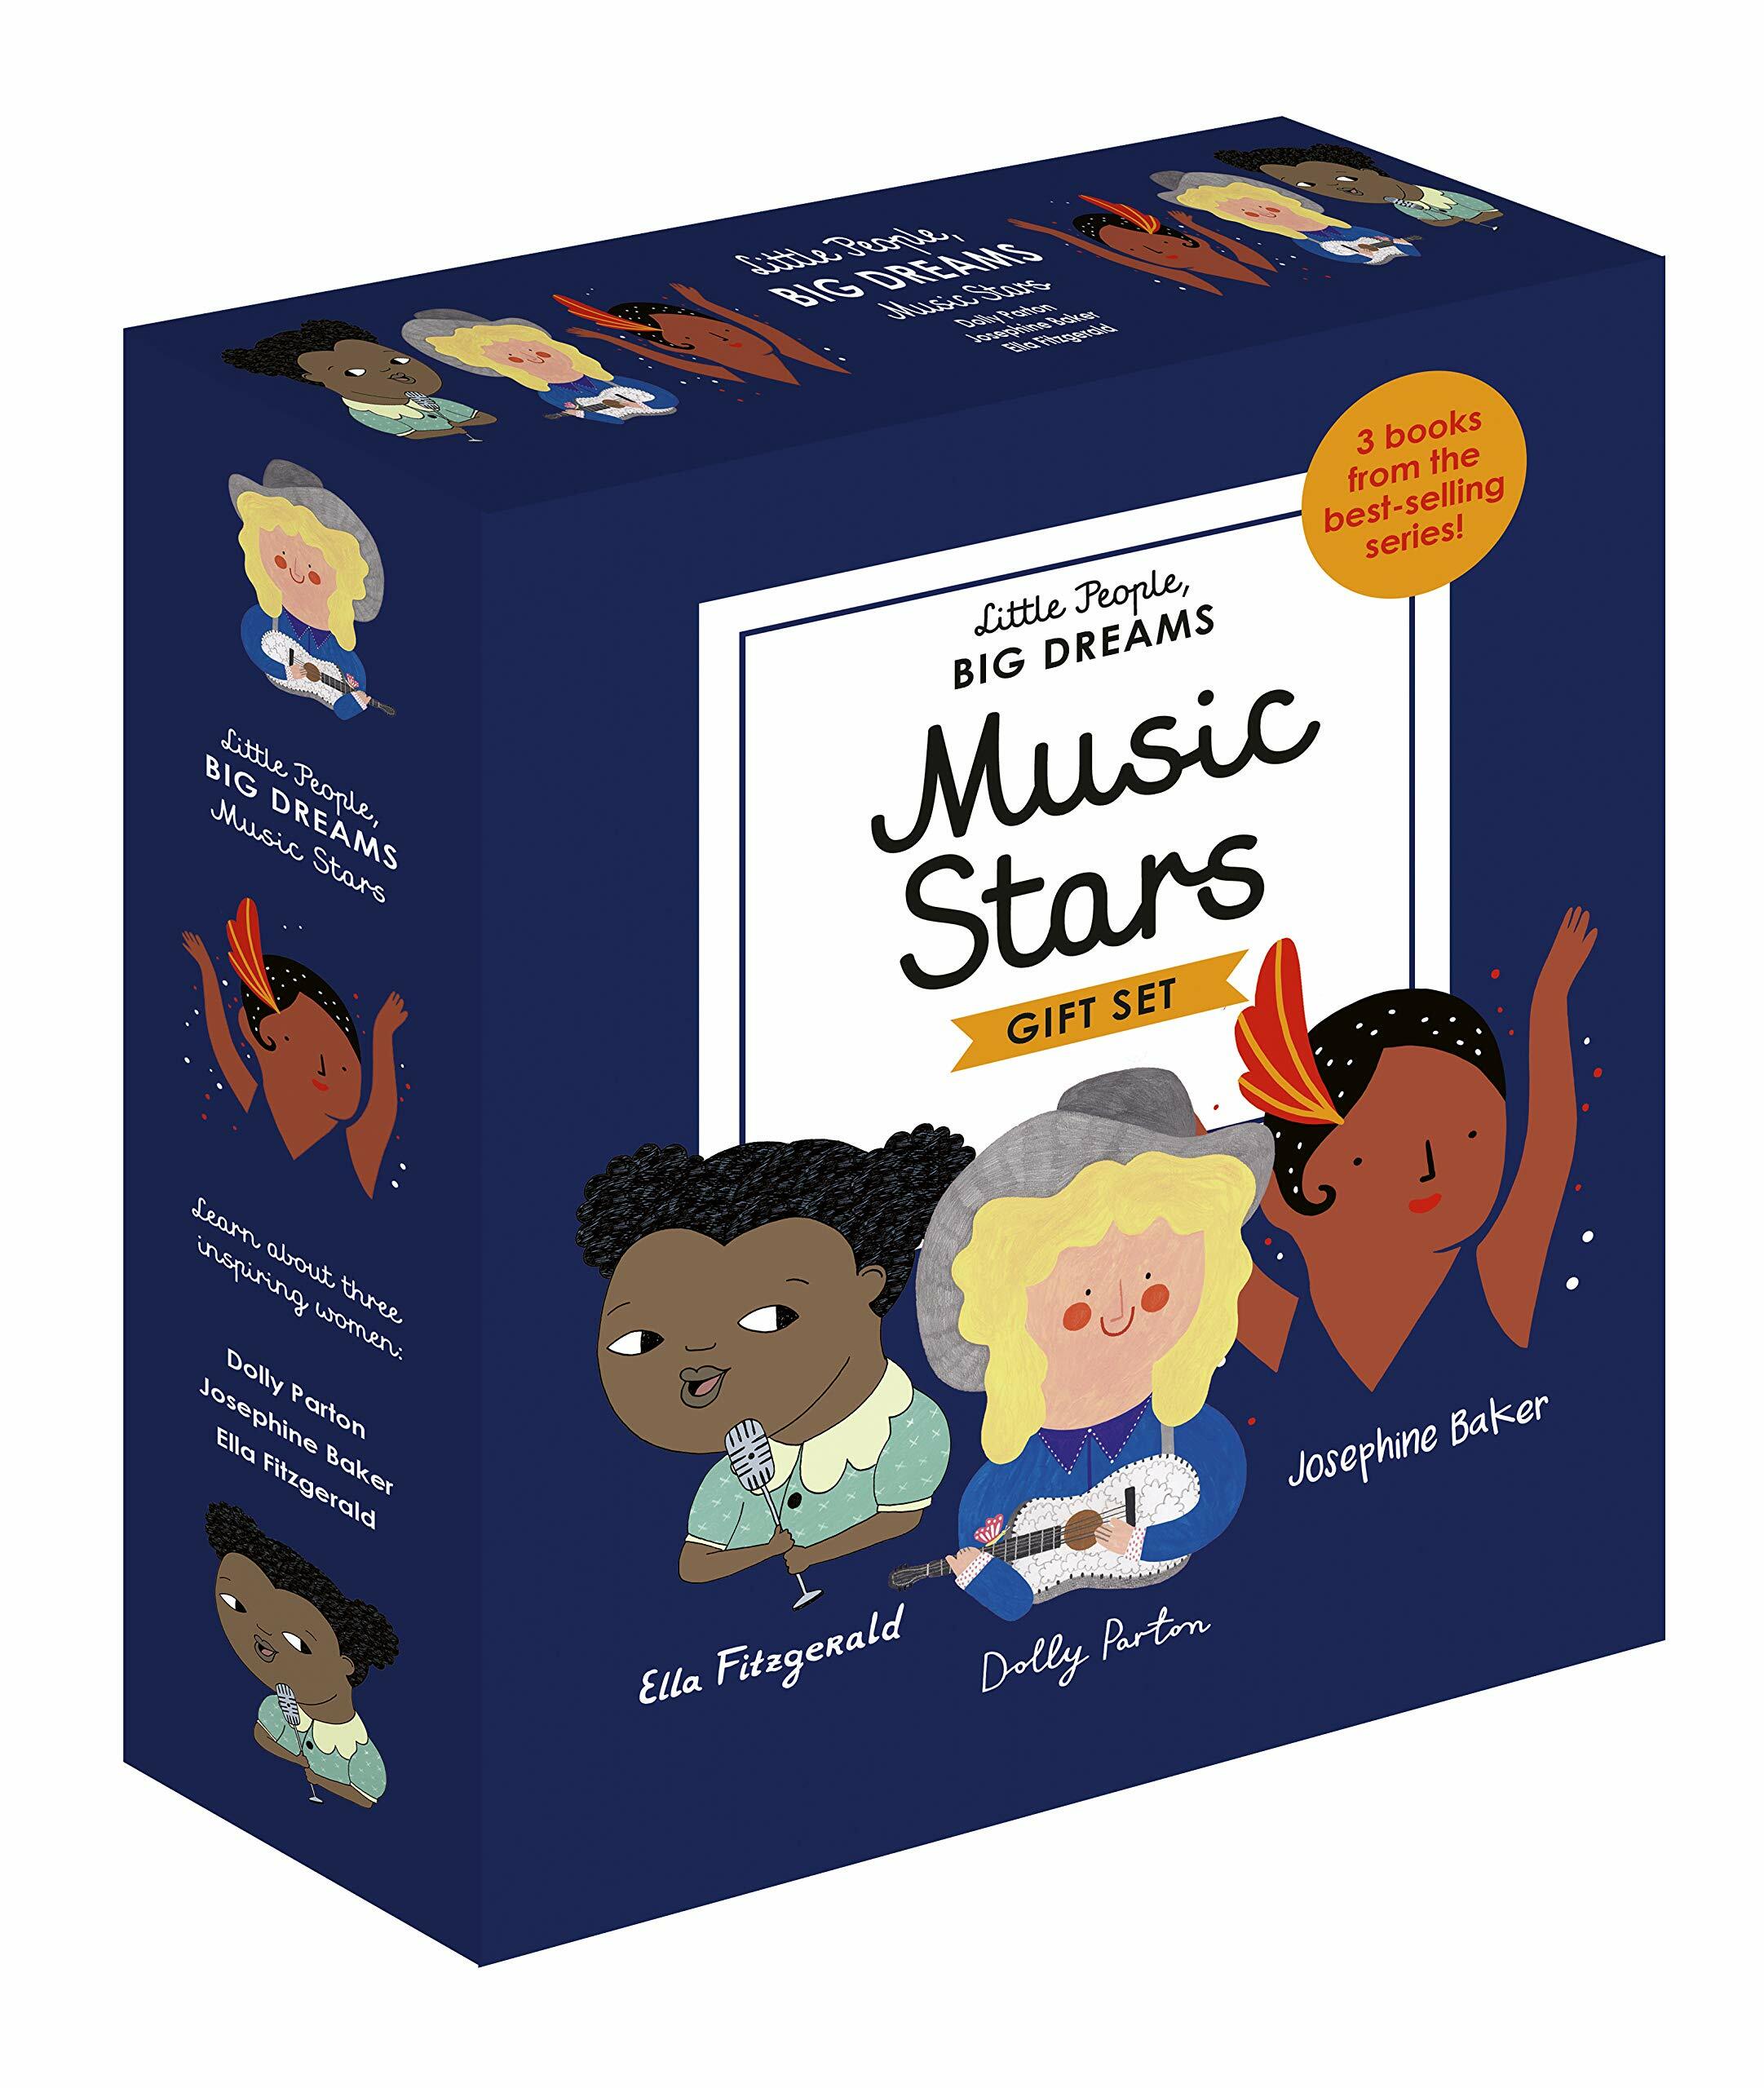 Little People, BIG DREAMS: Music Stars : 3 books from the best-selling series! Ella Fitzgerald - Dolly Parton - Josephine Baker (Hardcover)